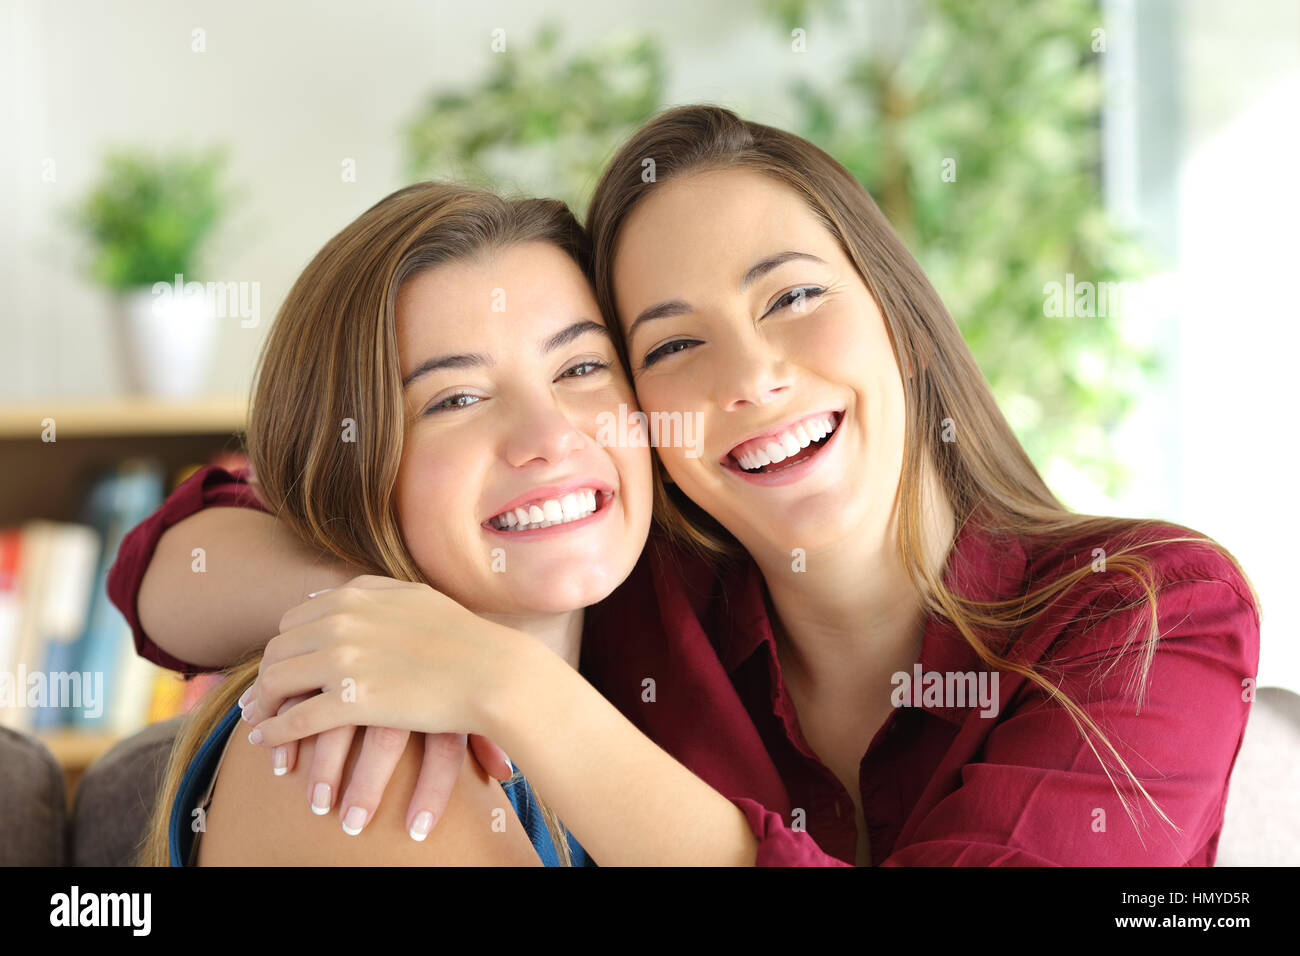 Front view portrait of a two happy friends or sisters posing smiling and looking at you with a homey background Stock Photo